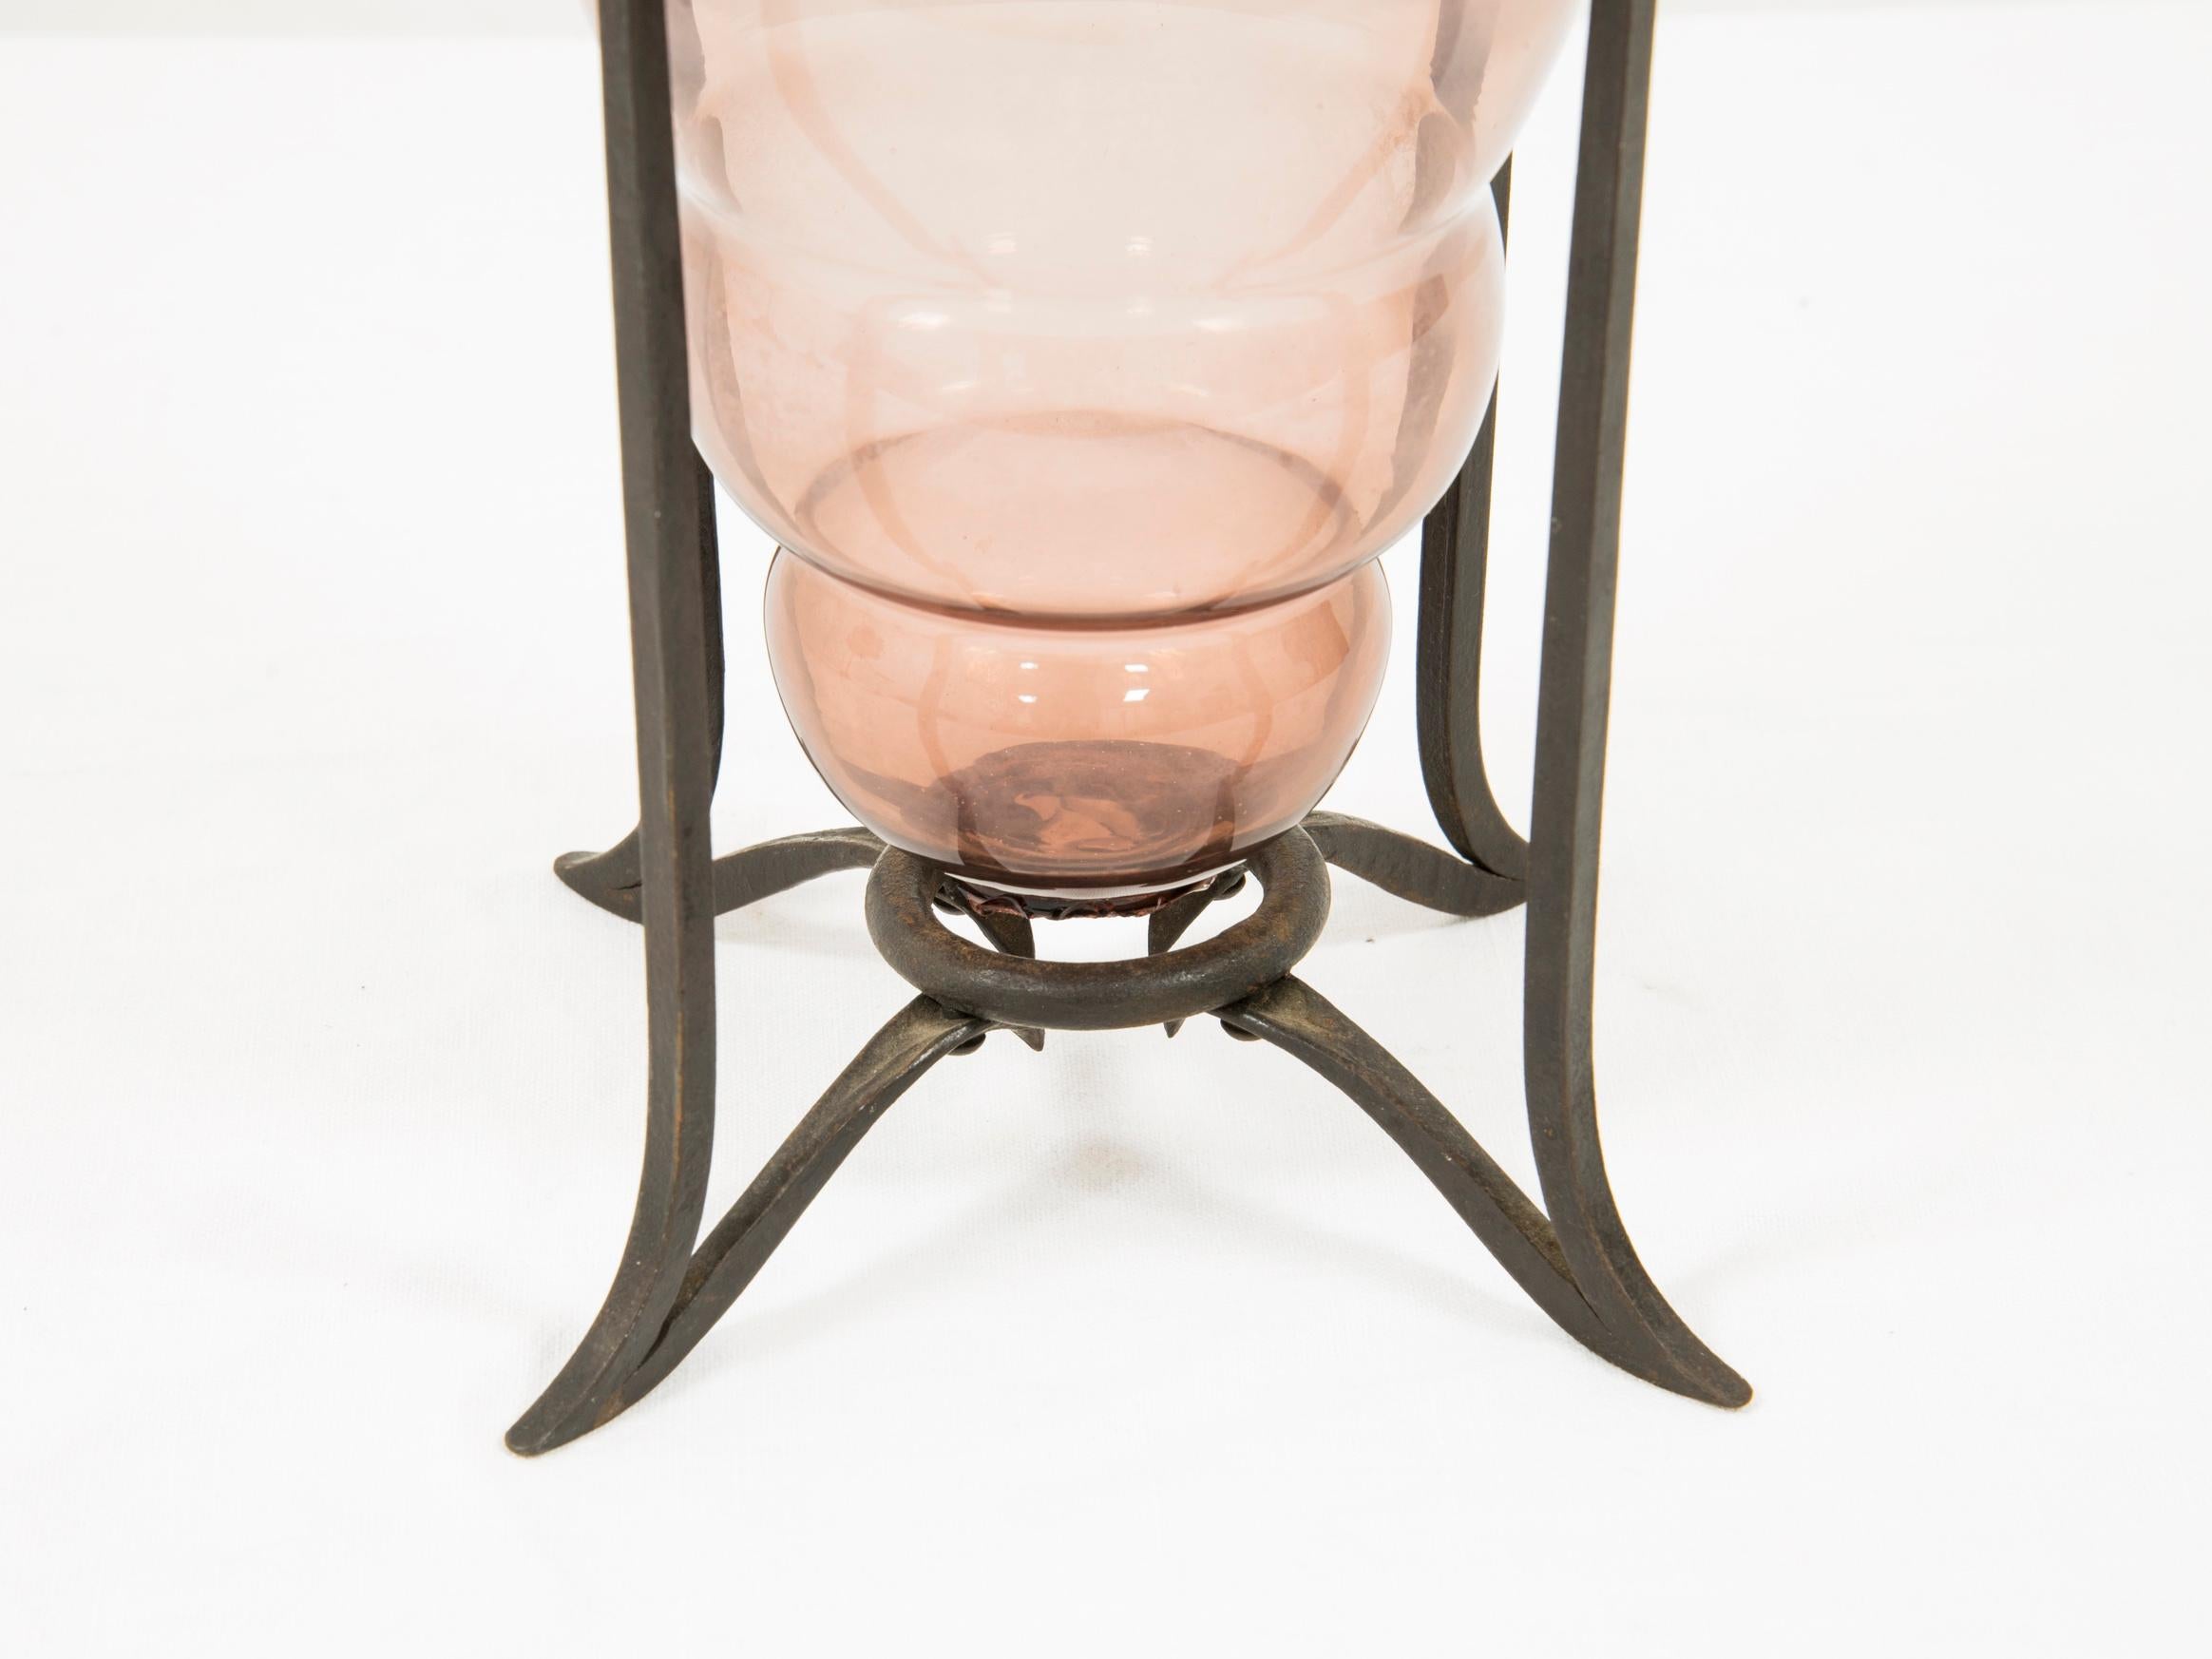 Umberto Bellotto
Vase
Pink glass, wrought iron
Italy, circa 1920
H 25 x D 18,5 cm

This piece has been published and references in the book : 